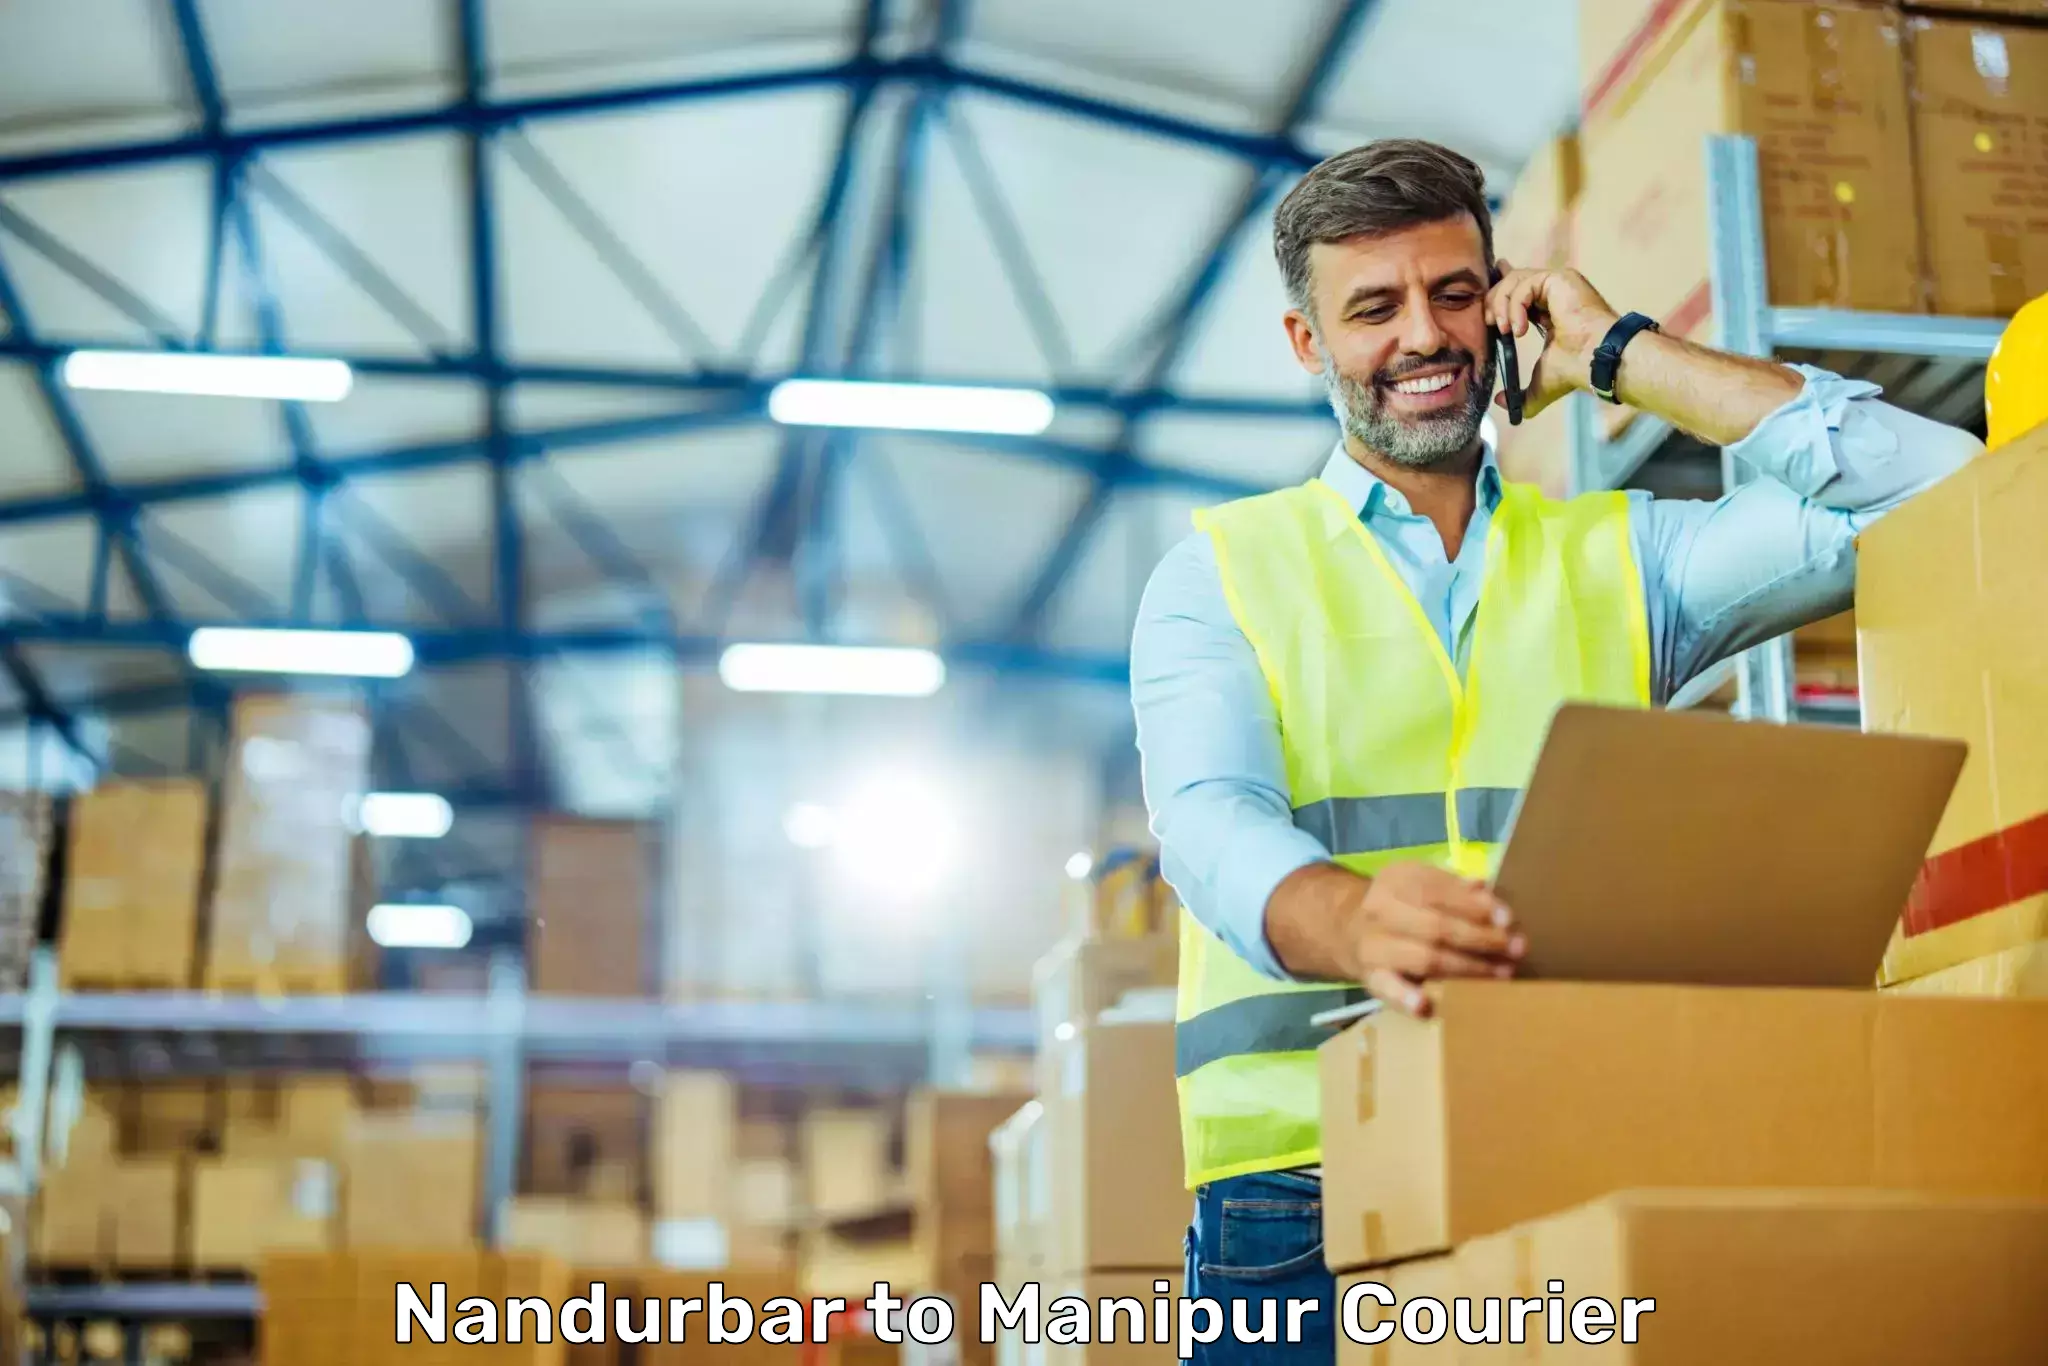 User-friendly delivery service Nandurbar to Manipur